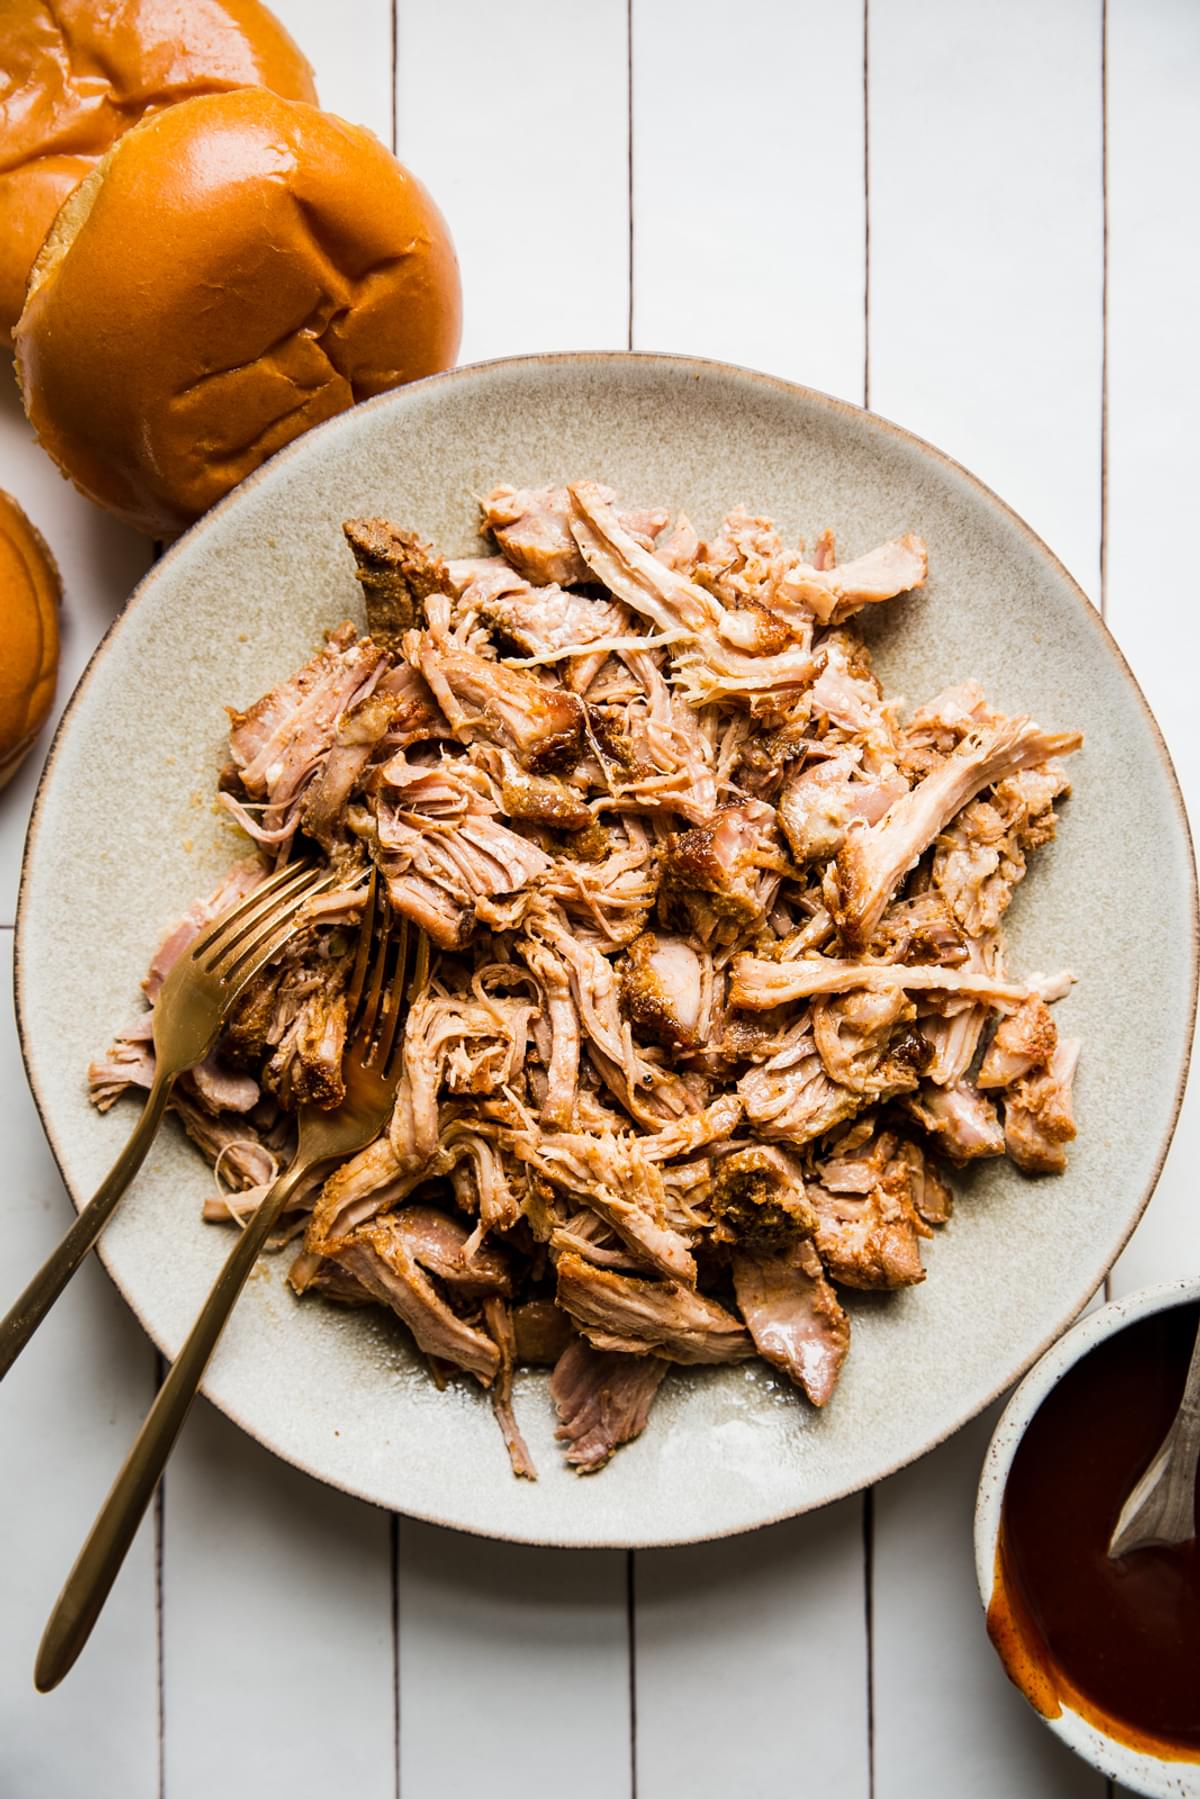 shredded pork shoulder cooked with spices, chicken stock, and vinegar. Shredded and mixed with bbq sauce on a plate.